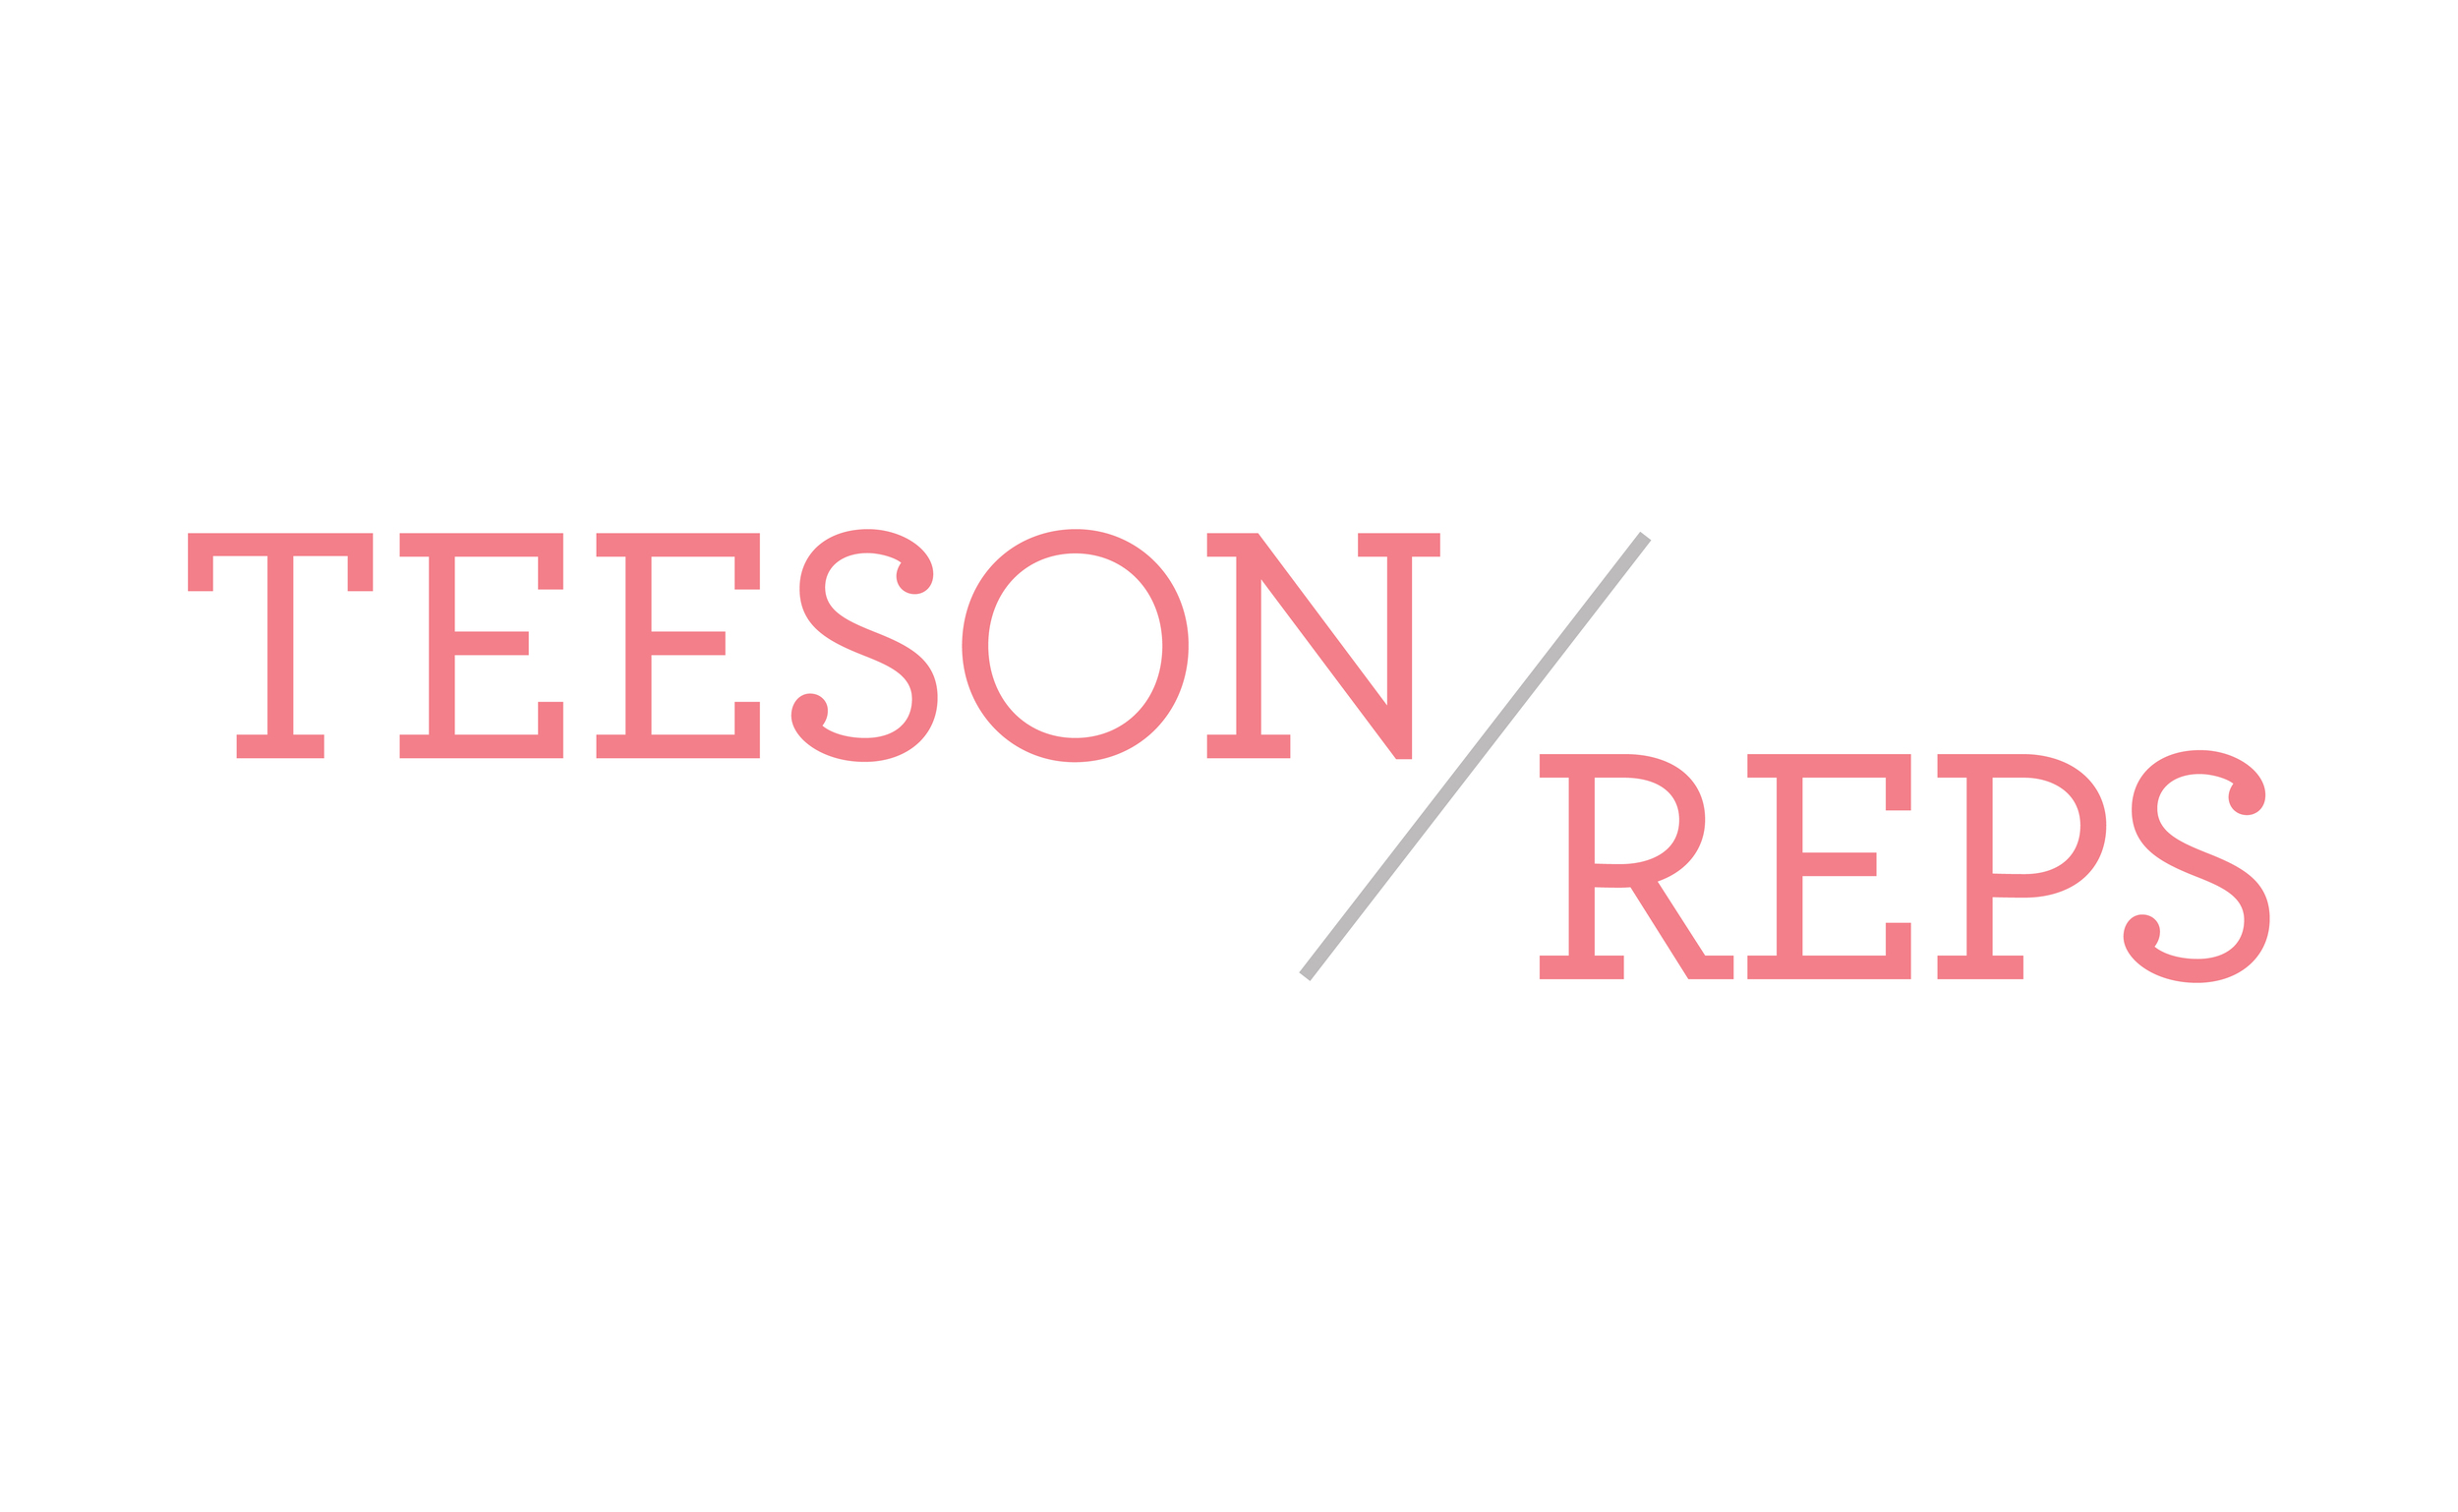  CLIENT: TEESON REPS  PROJECT: Business Naming and Logo Design 